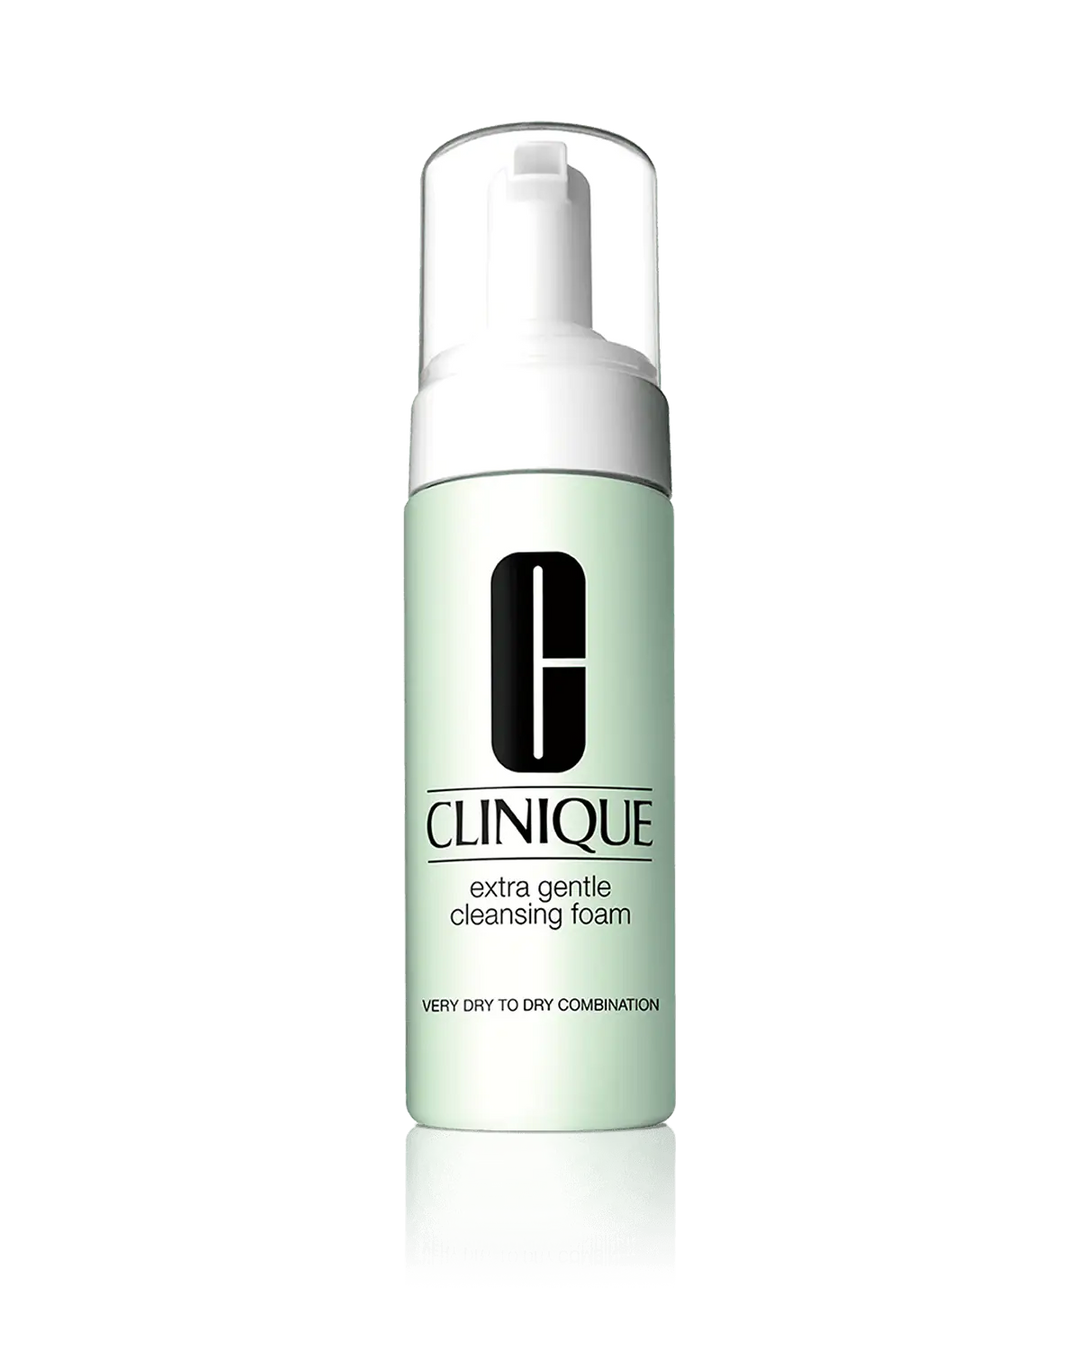 Shop The Latest Collection Of Clinique Extra Gentle Cleansing Foam In Lebanon